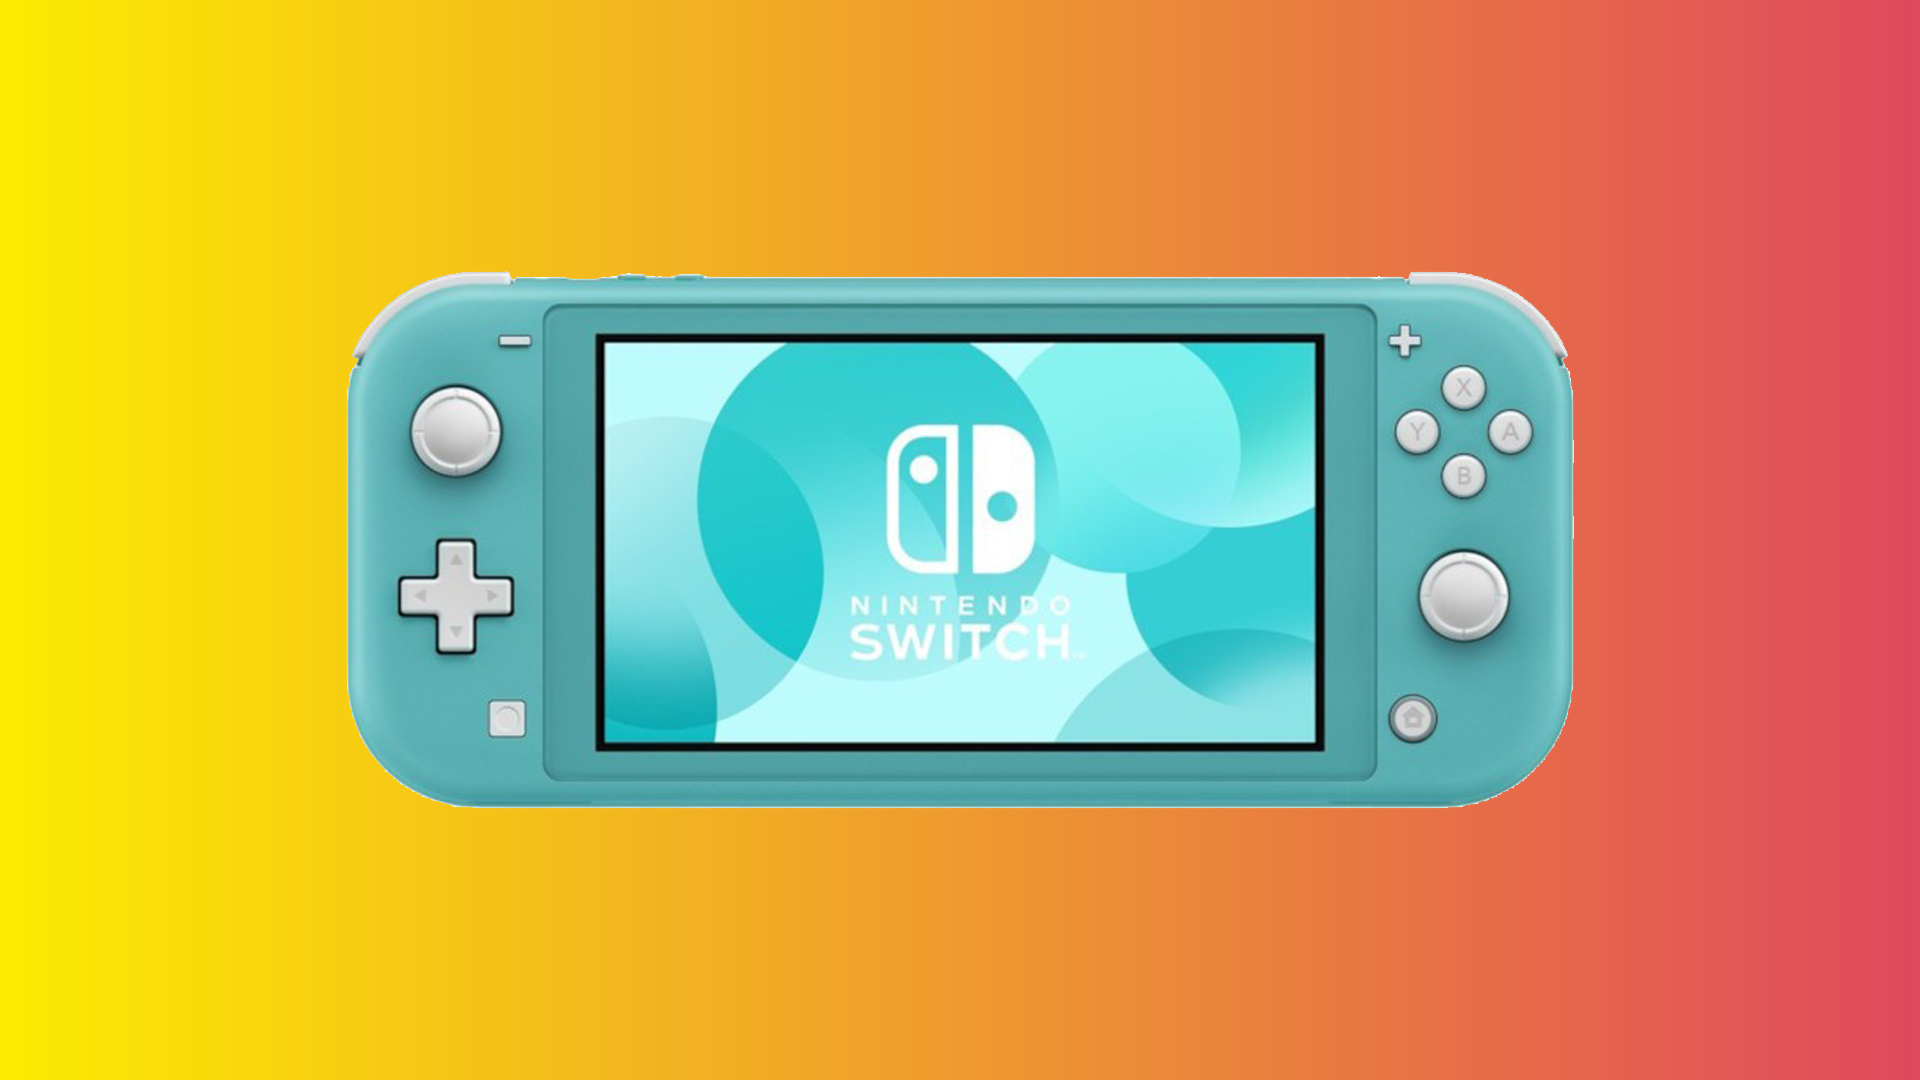 Nintendo Switch Lite on a multicolored background.